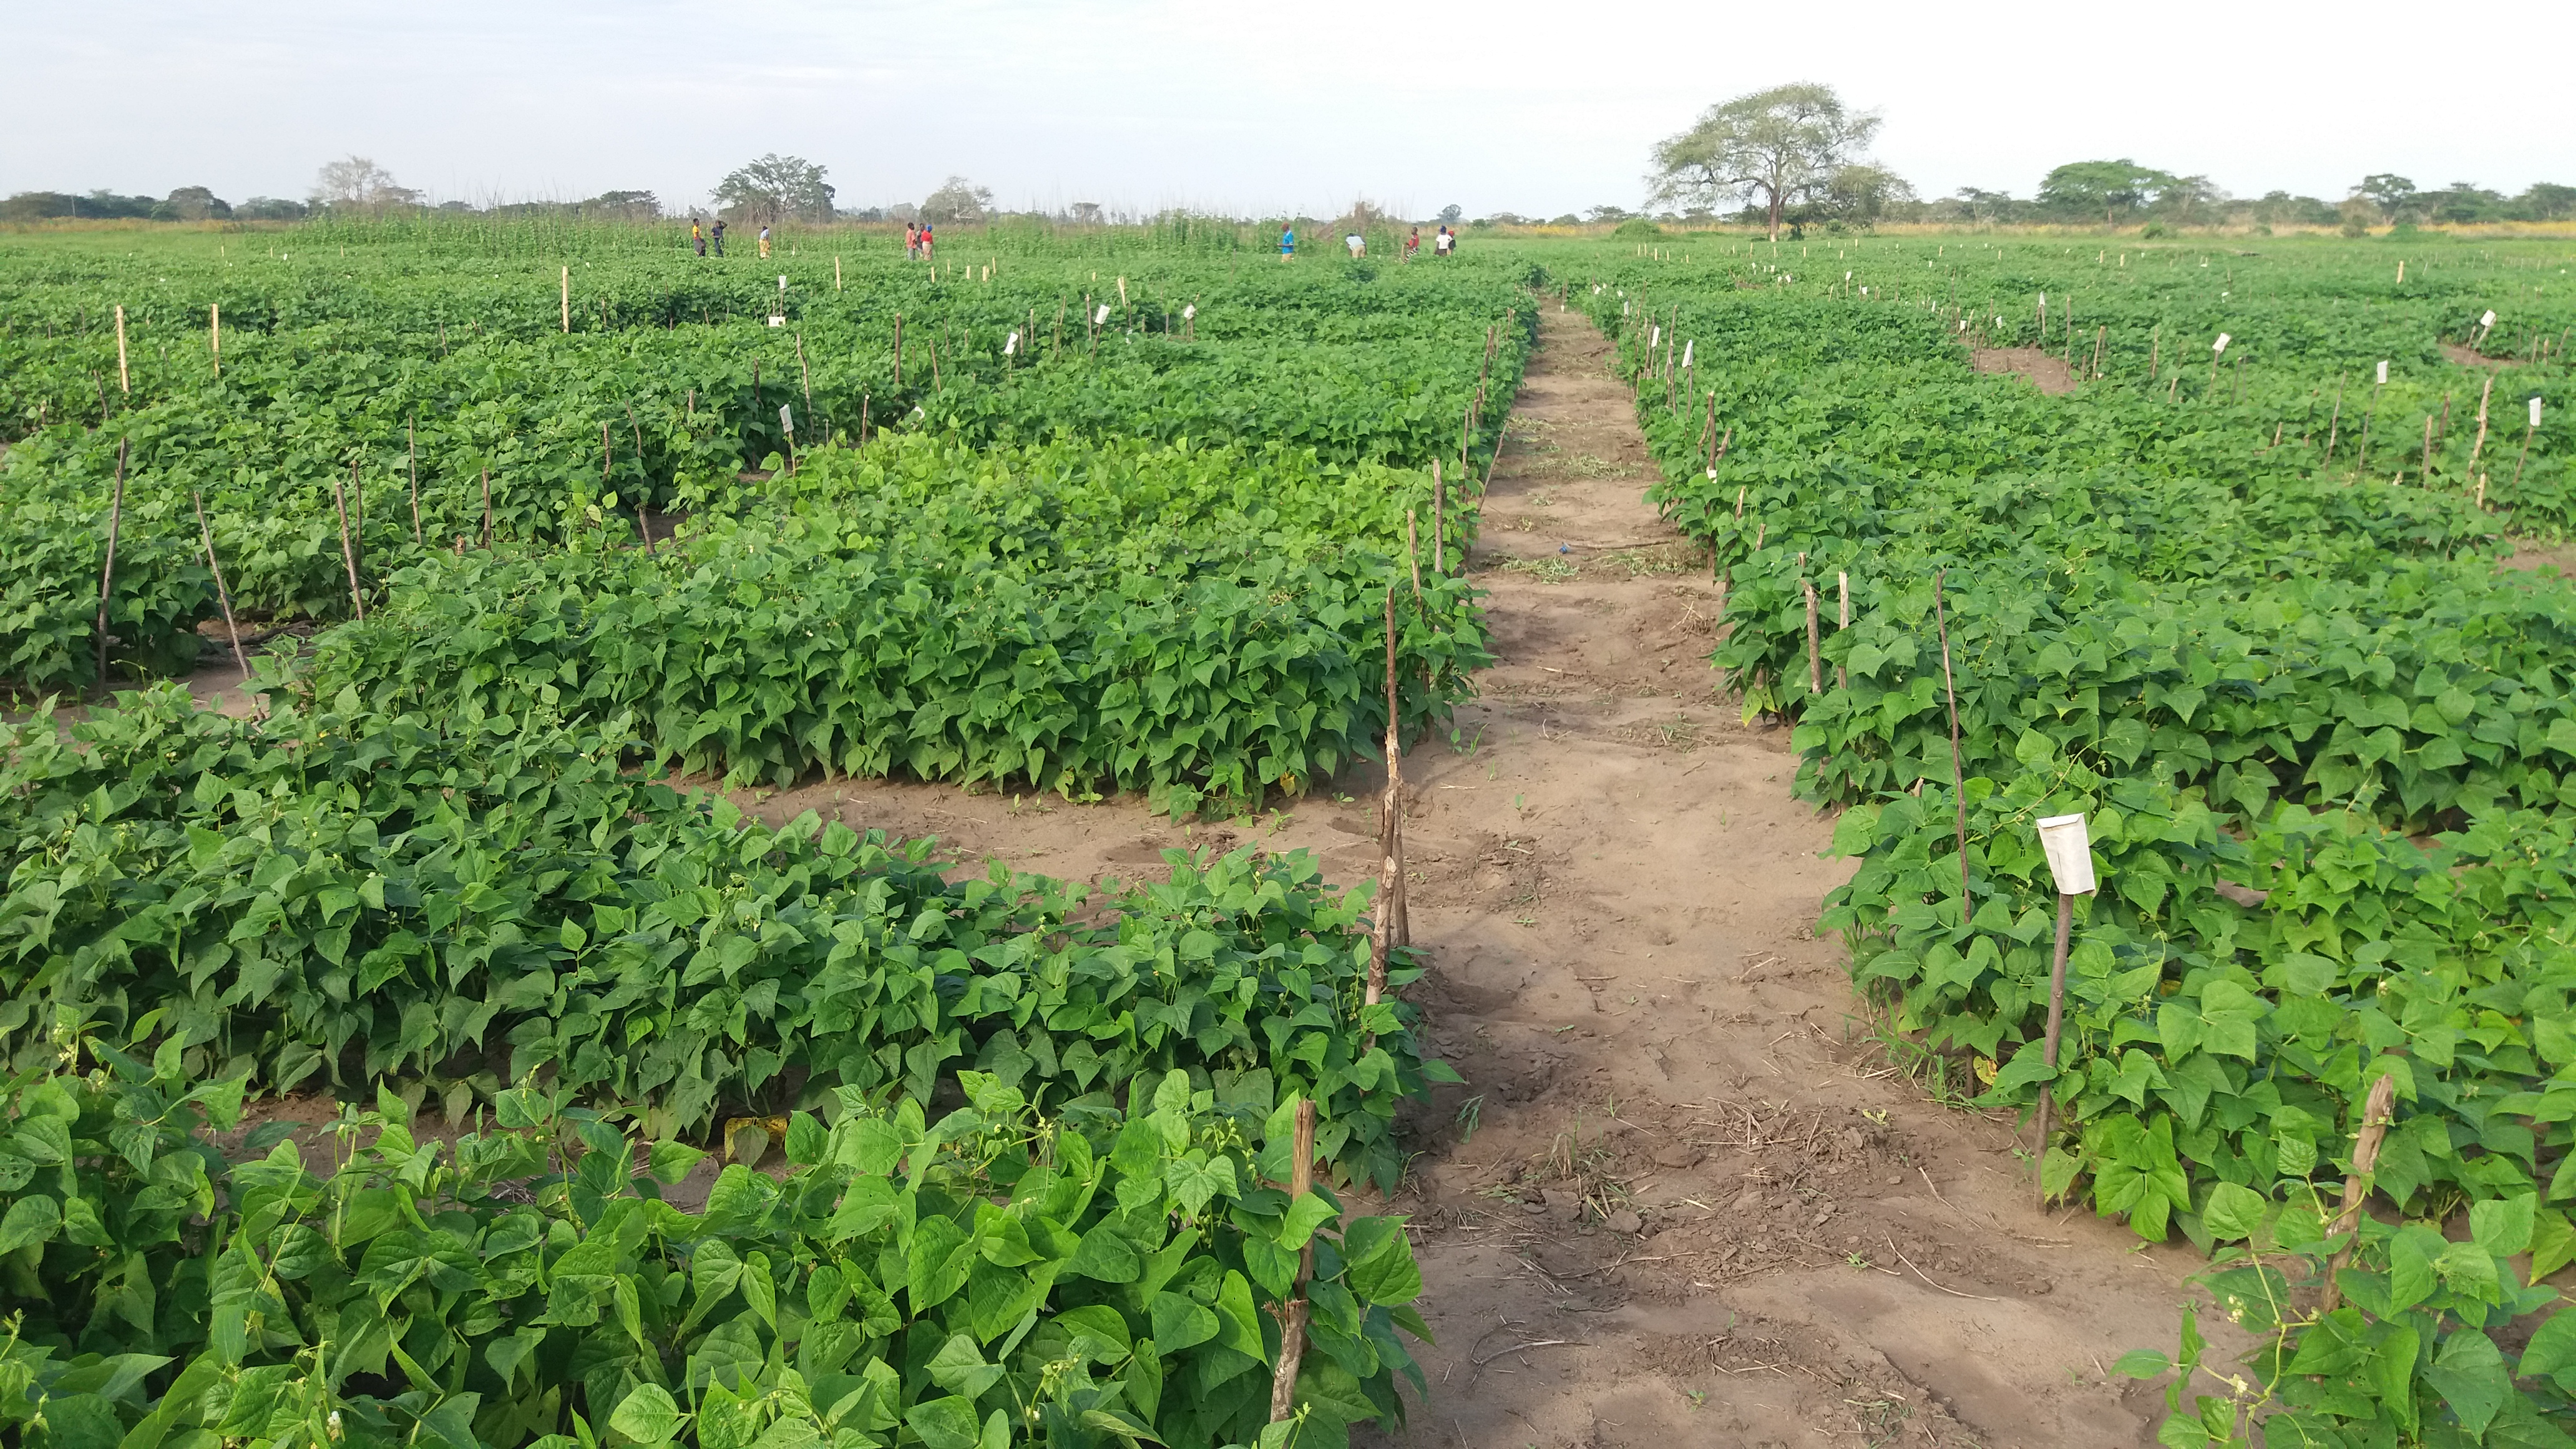 The Accelerated Varietal Improvement and Seed Delivery of Legumes and Cereals in Africa (AVISA) project 